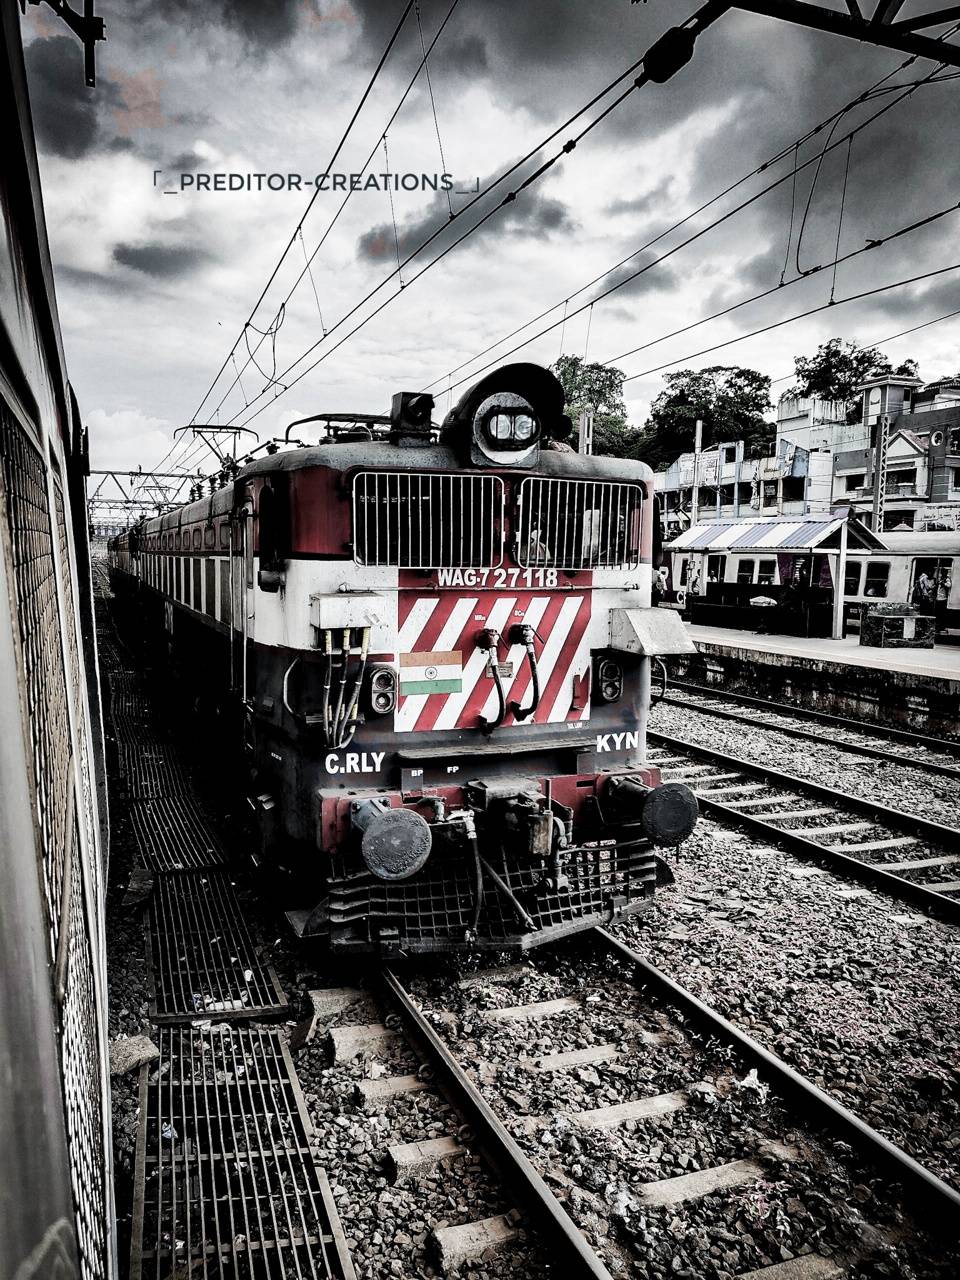 100 Indian Railway Pictures  Download Free Images on Unsplash